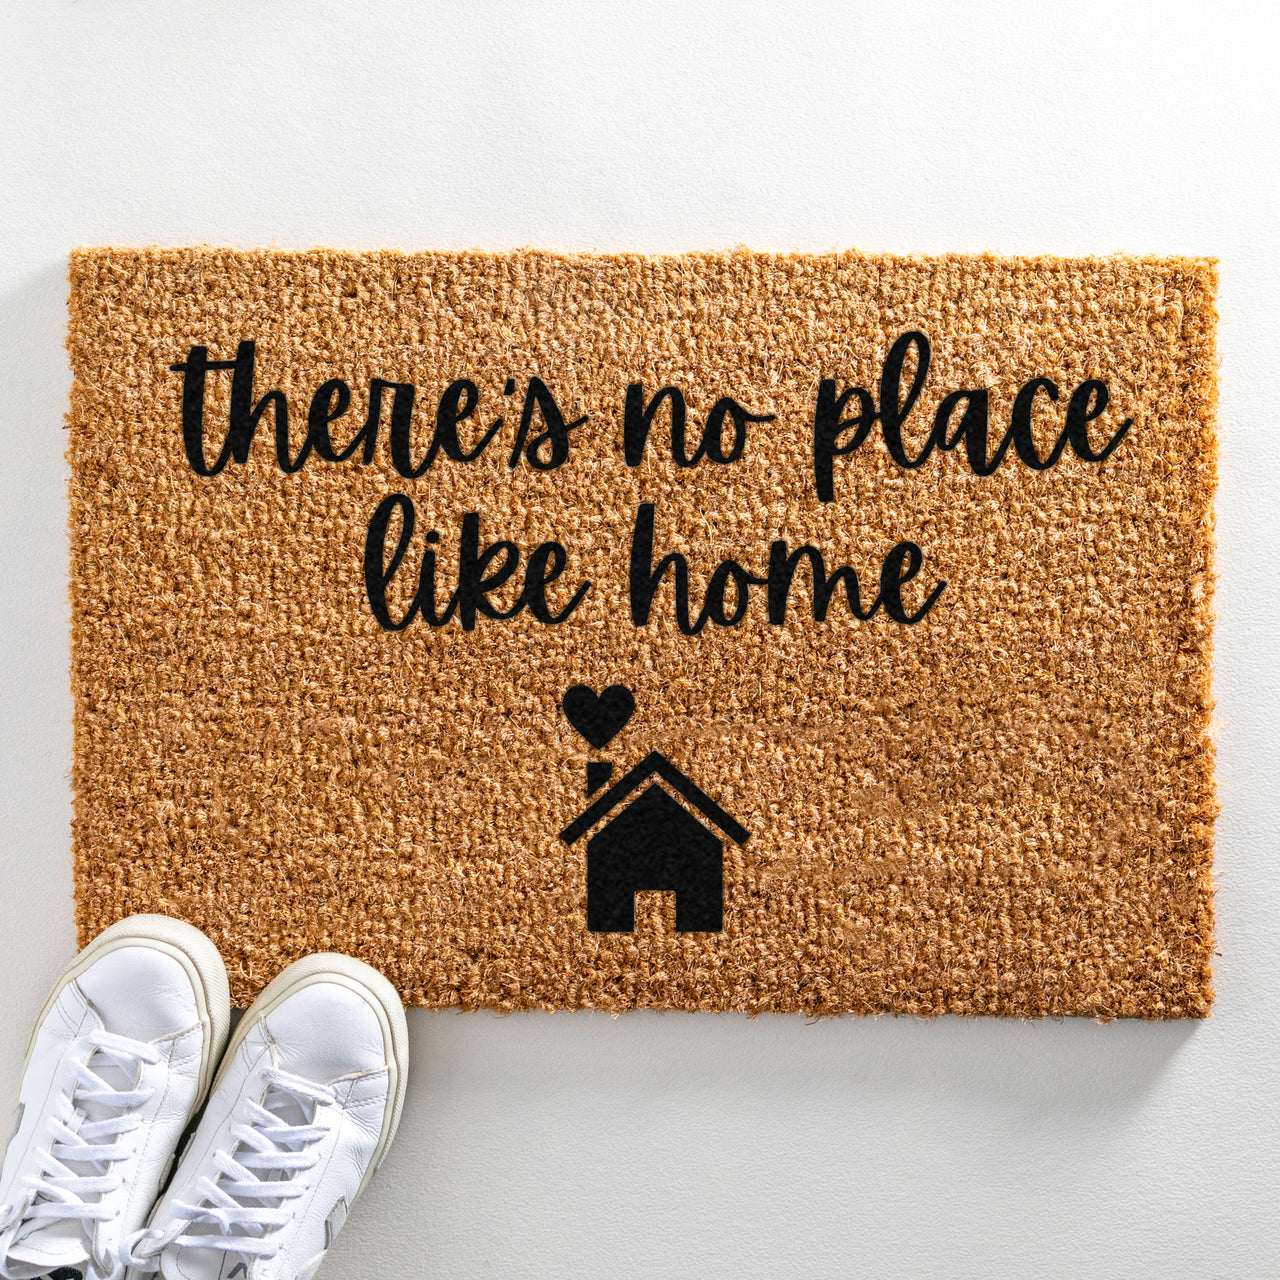 There's No Place Like Home Doormat